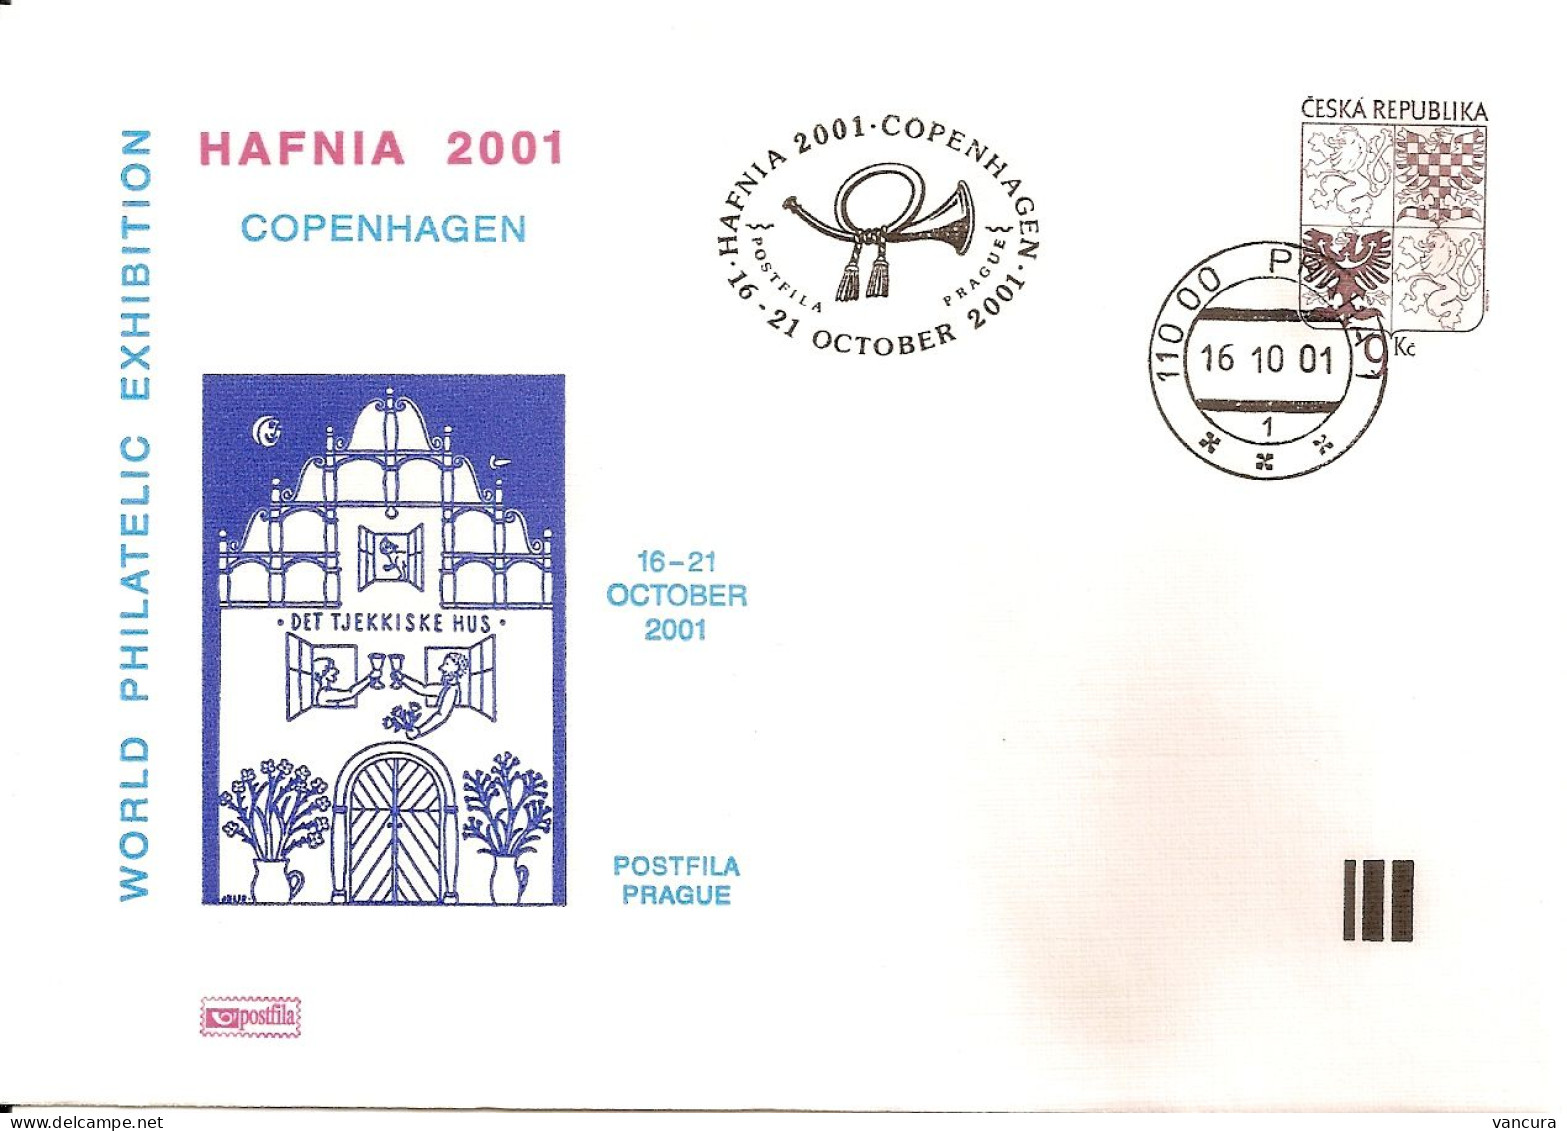 COB A 75 Czech Republic Hafnia Stamp Exhibition 2001 NOTICE POOR SCAN, BUT THE COVER IS FINE! - Omslagen